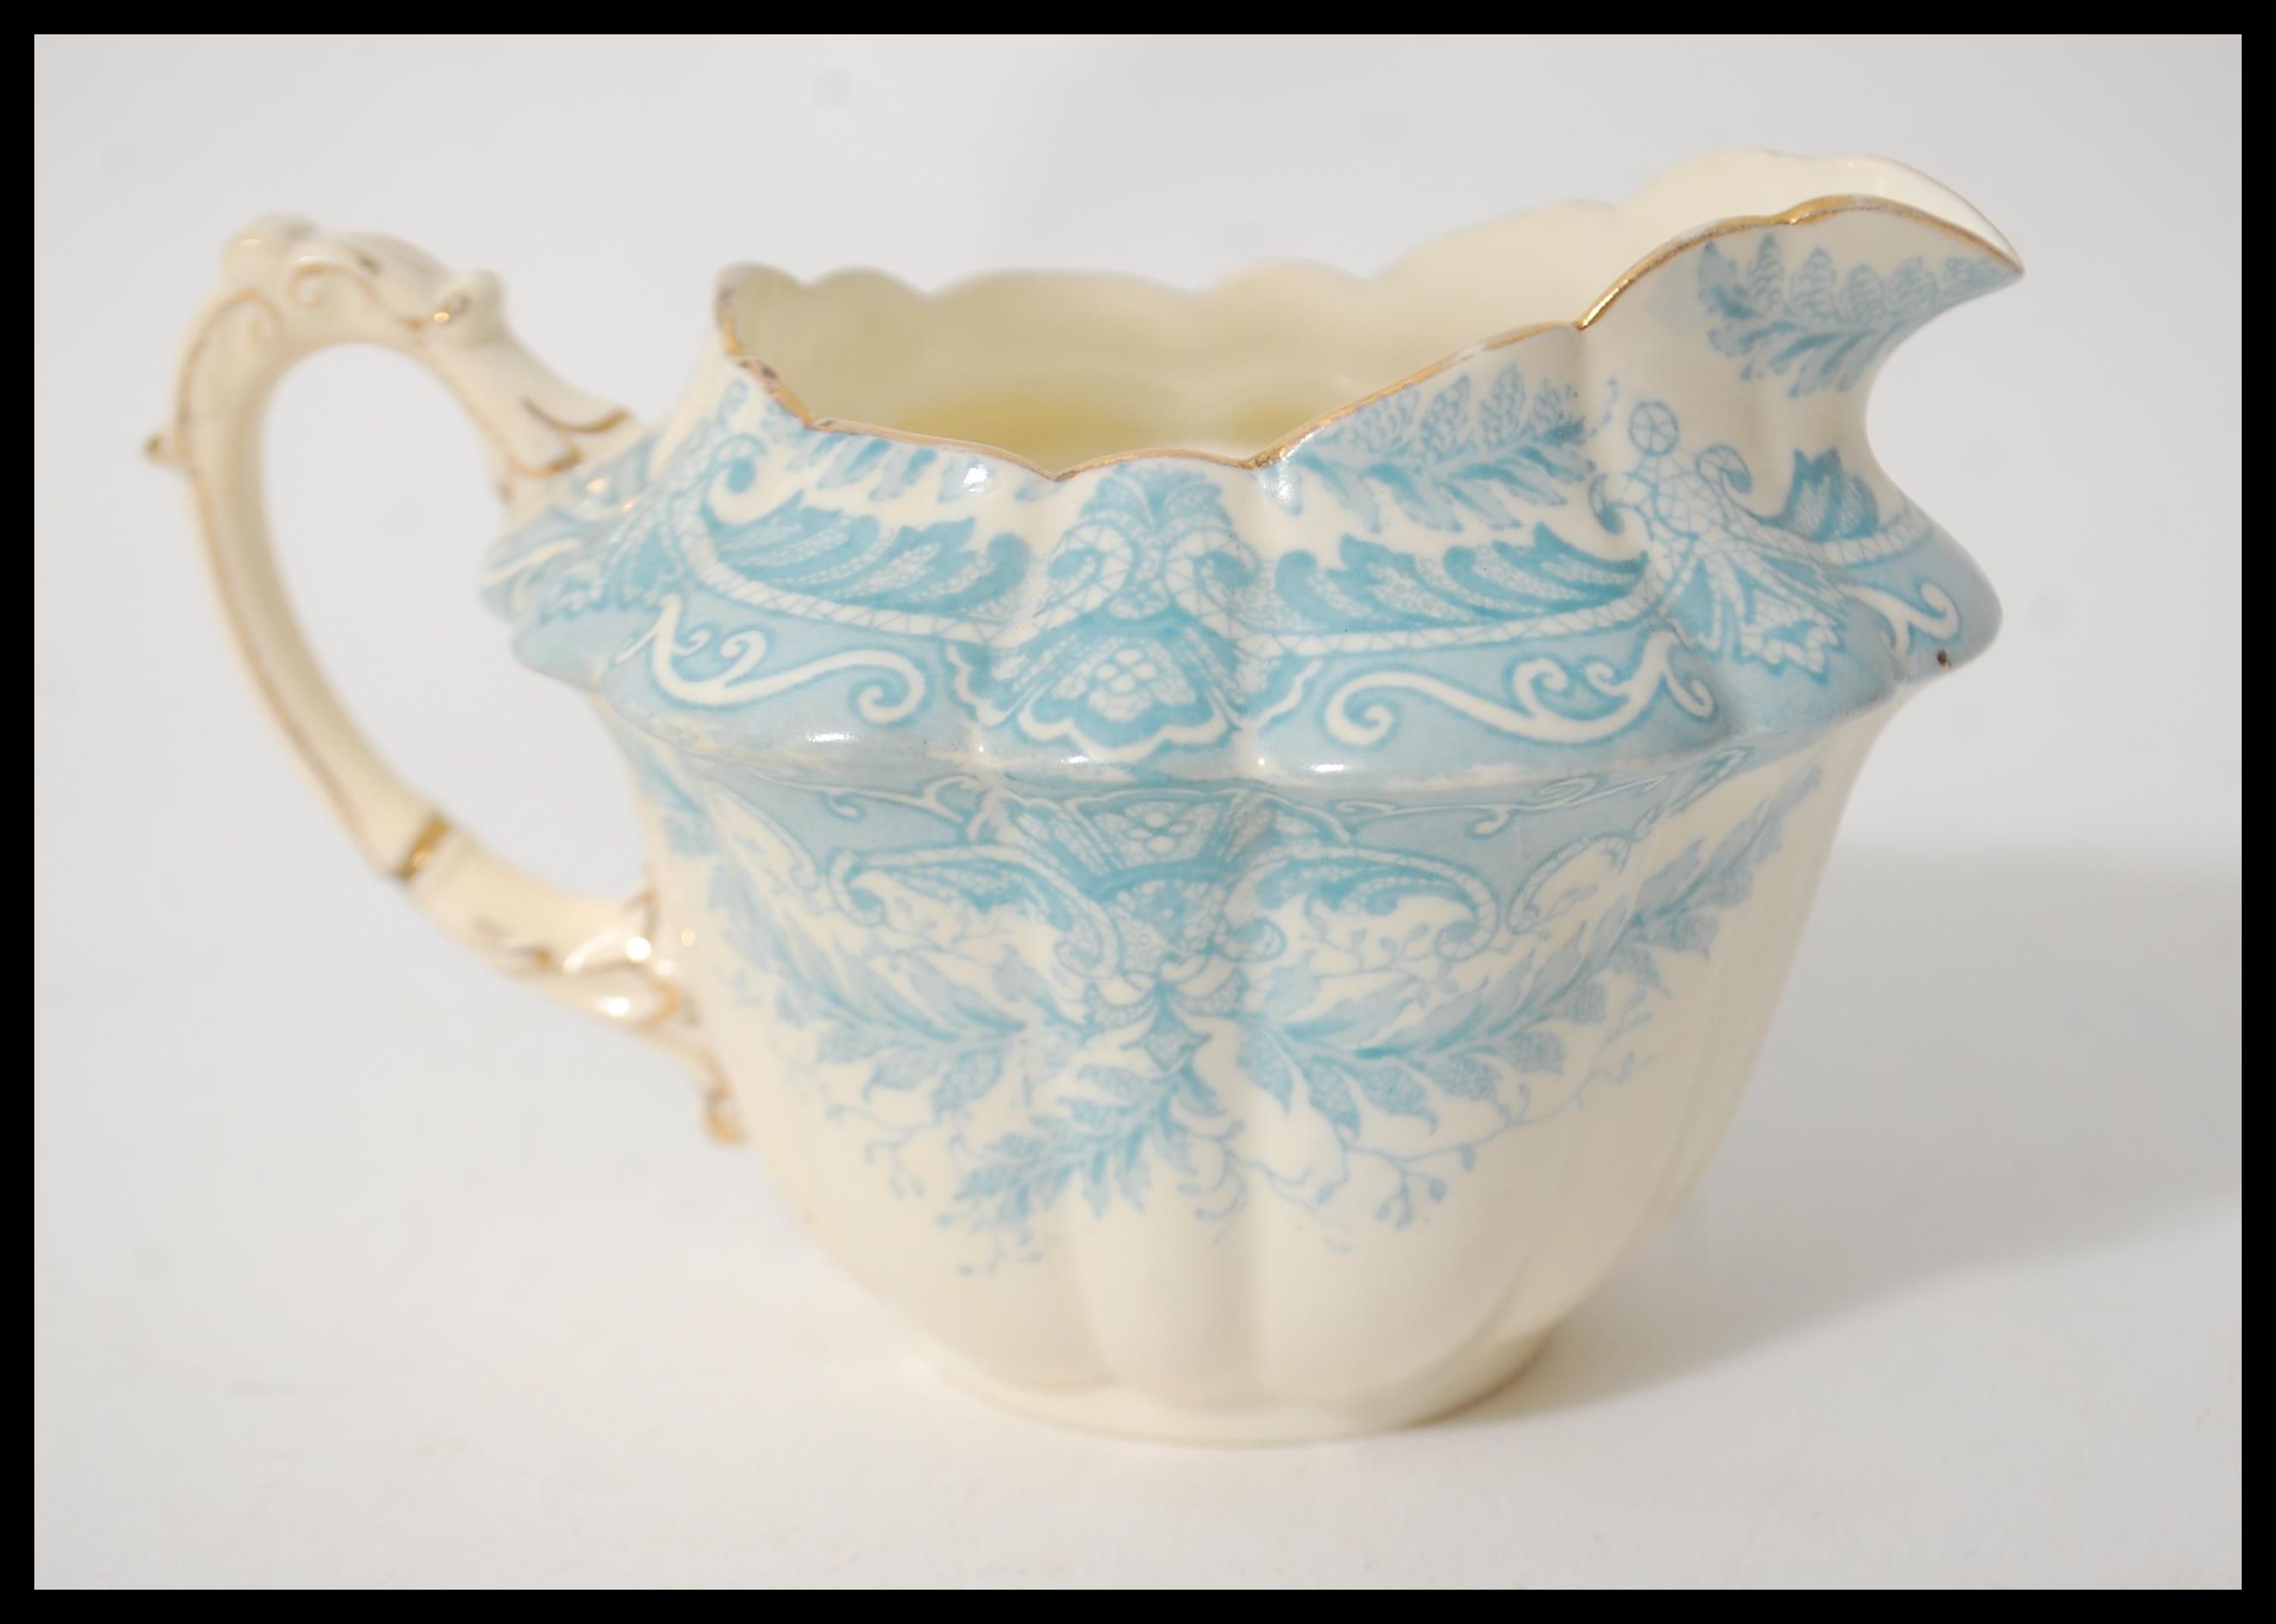 A 19th century Victorian Foley tea service transfer printed in the fern pattern in blue having - Image 5 of 11